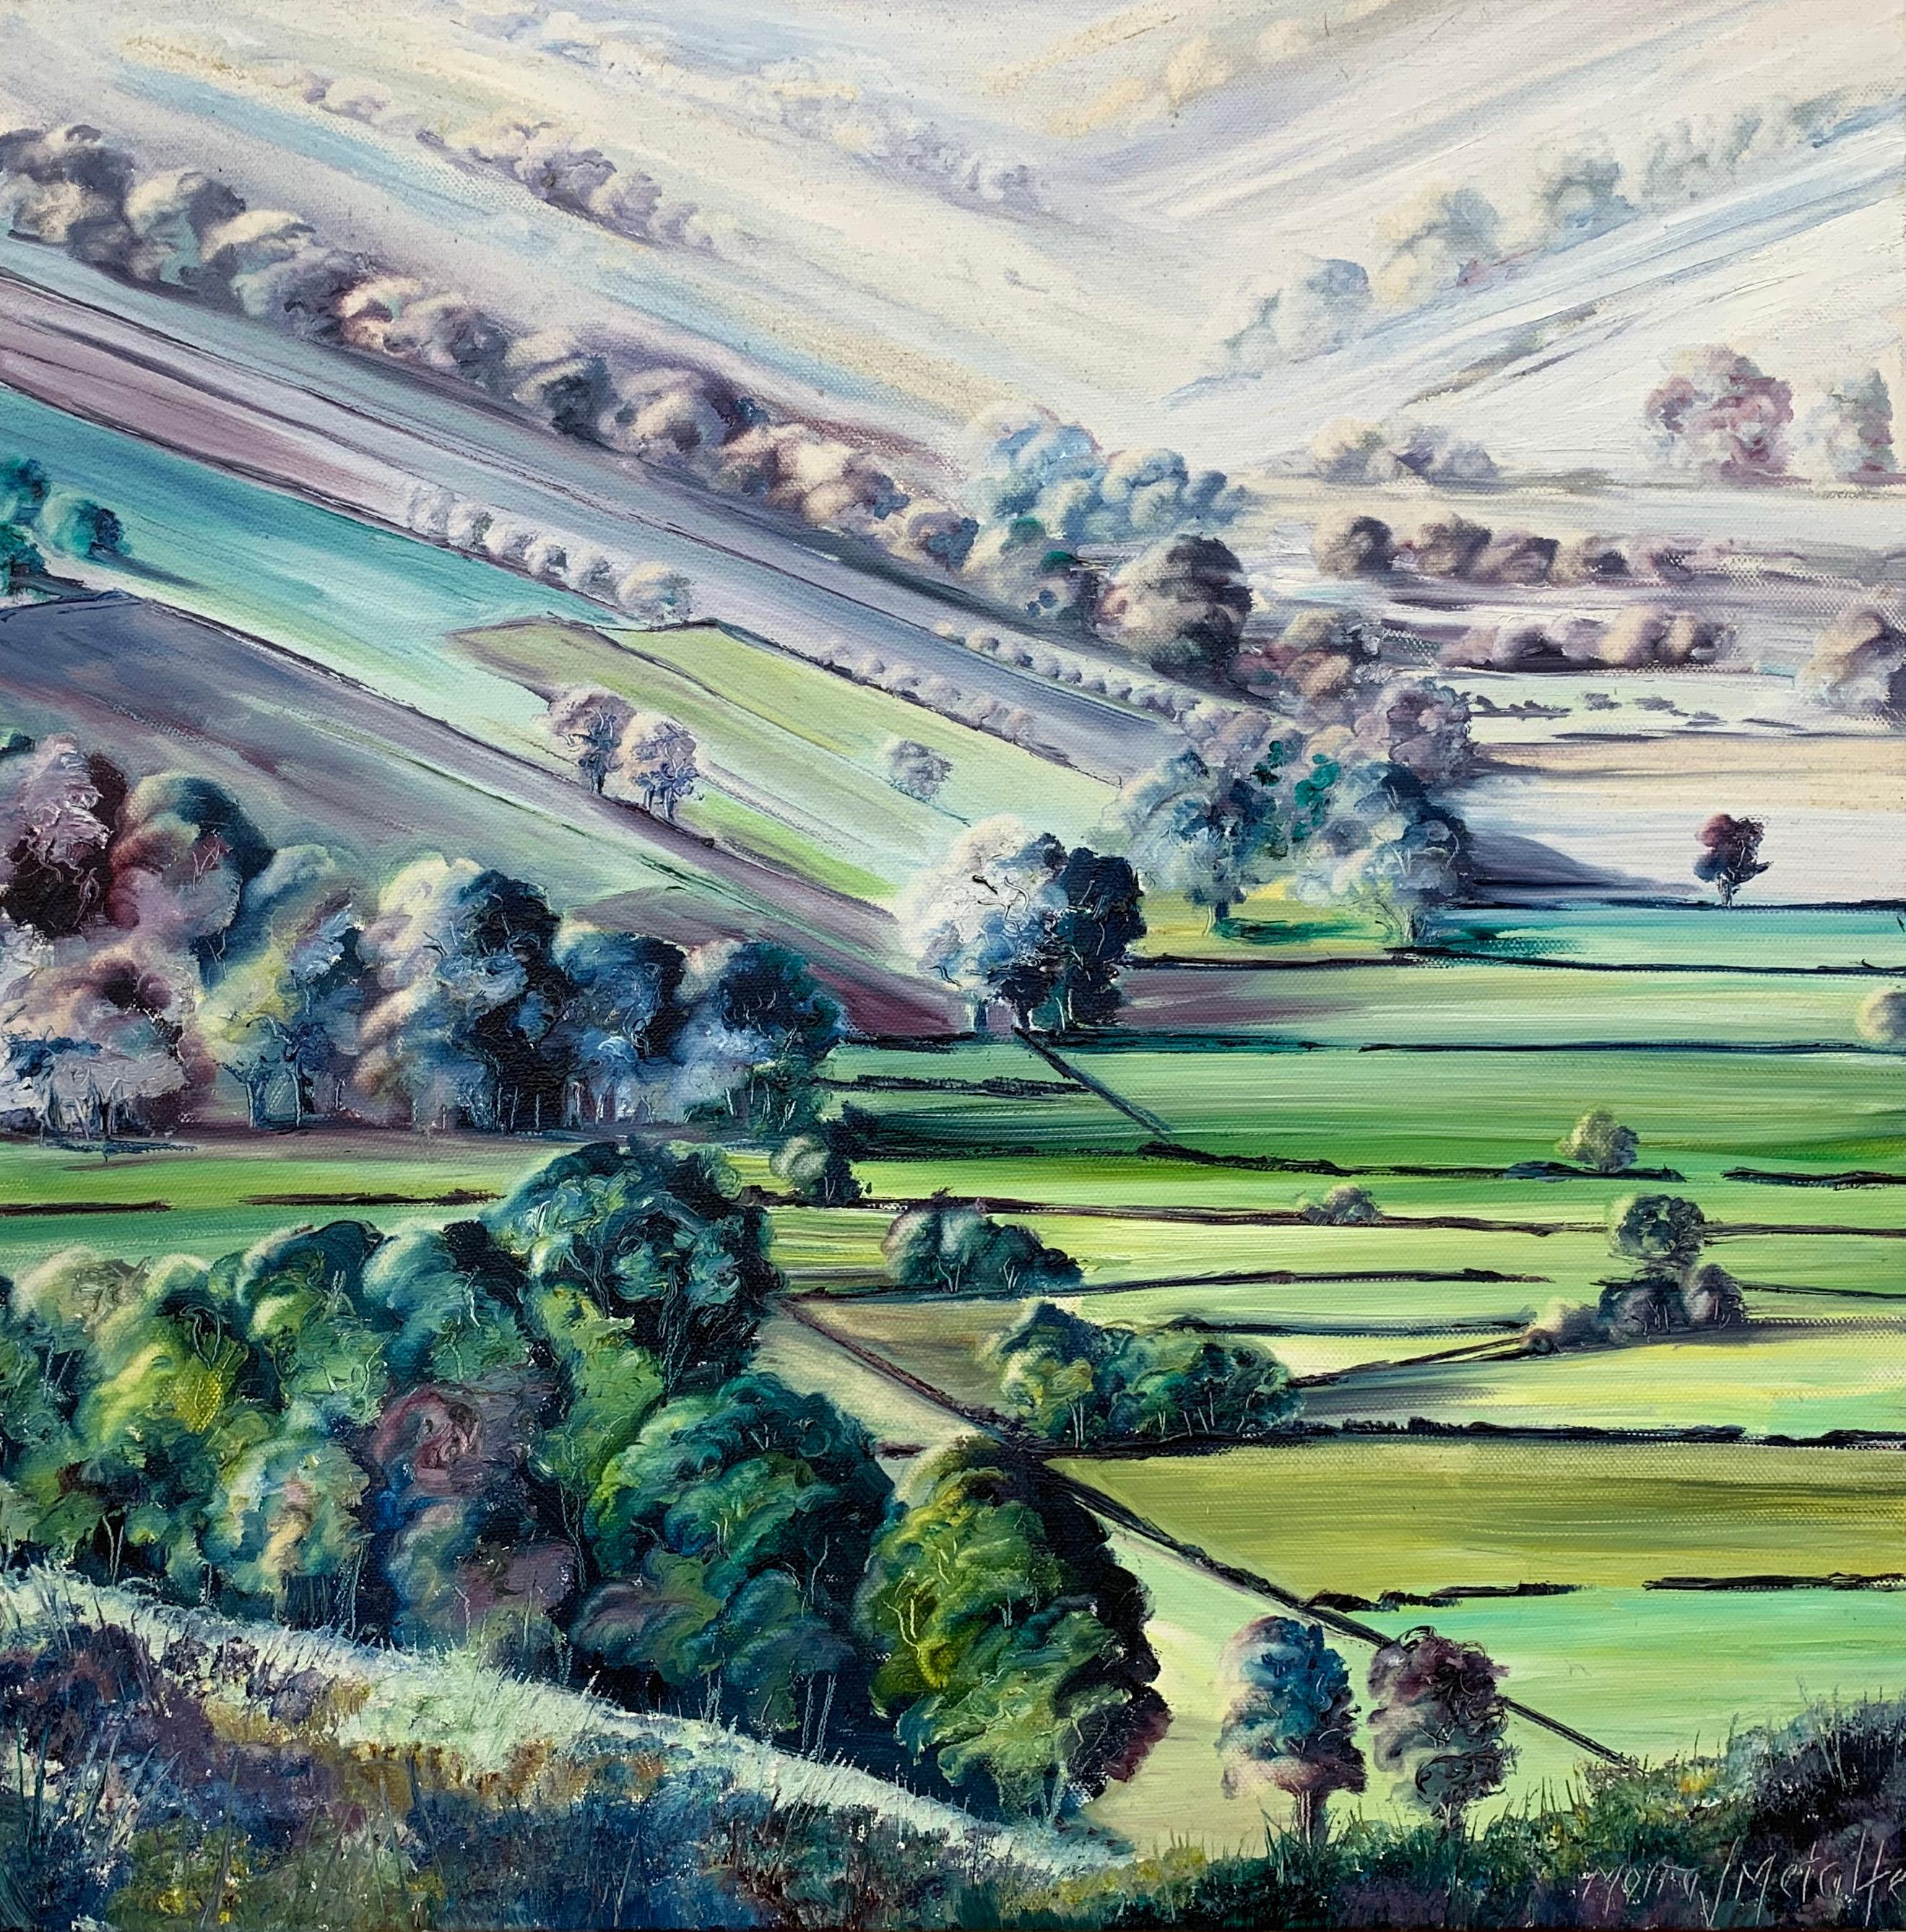 Abstract Landscape Oil Painting of the Yorkshire Dales Fields by British Artist